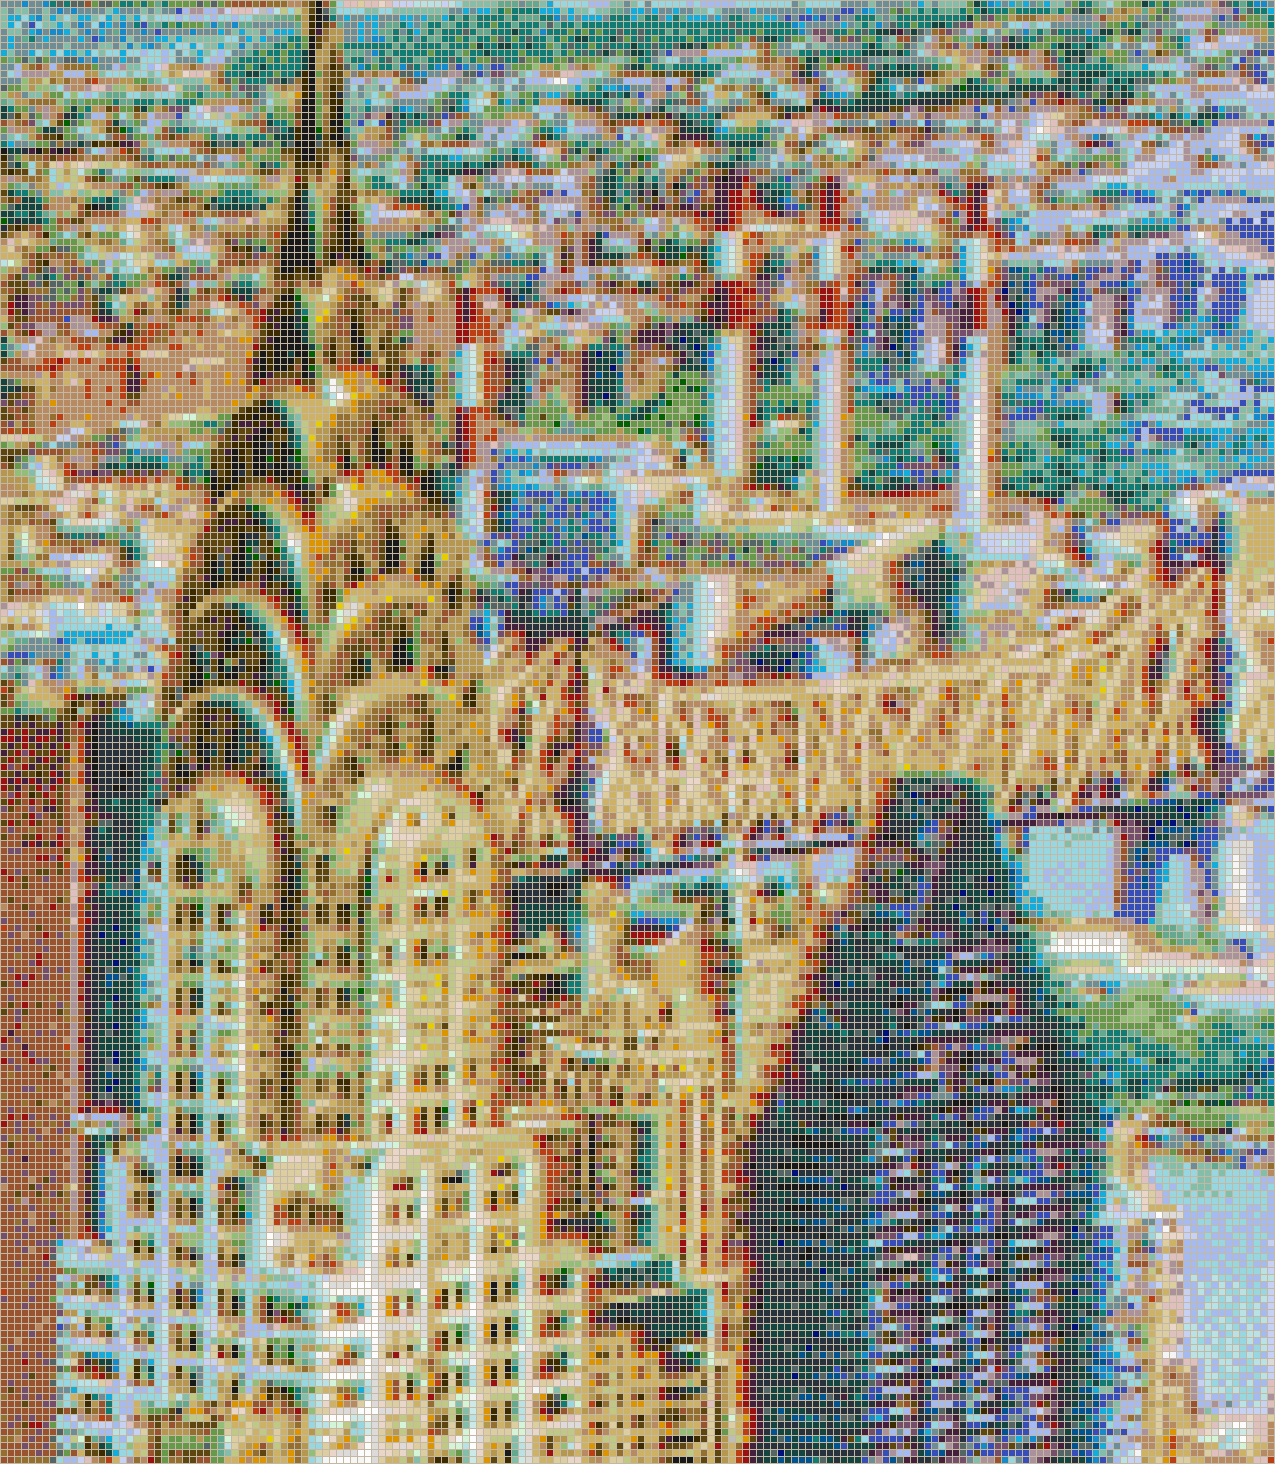 Chrysler Building from the Empire State - Mosaic Tile Picture Art